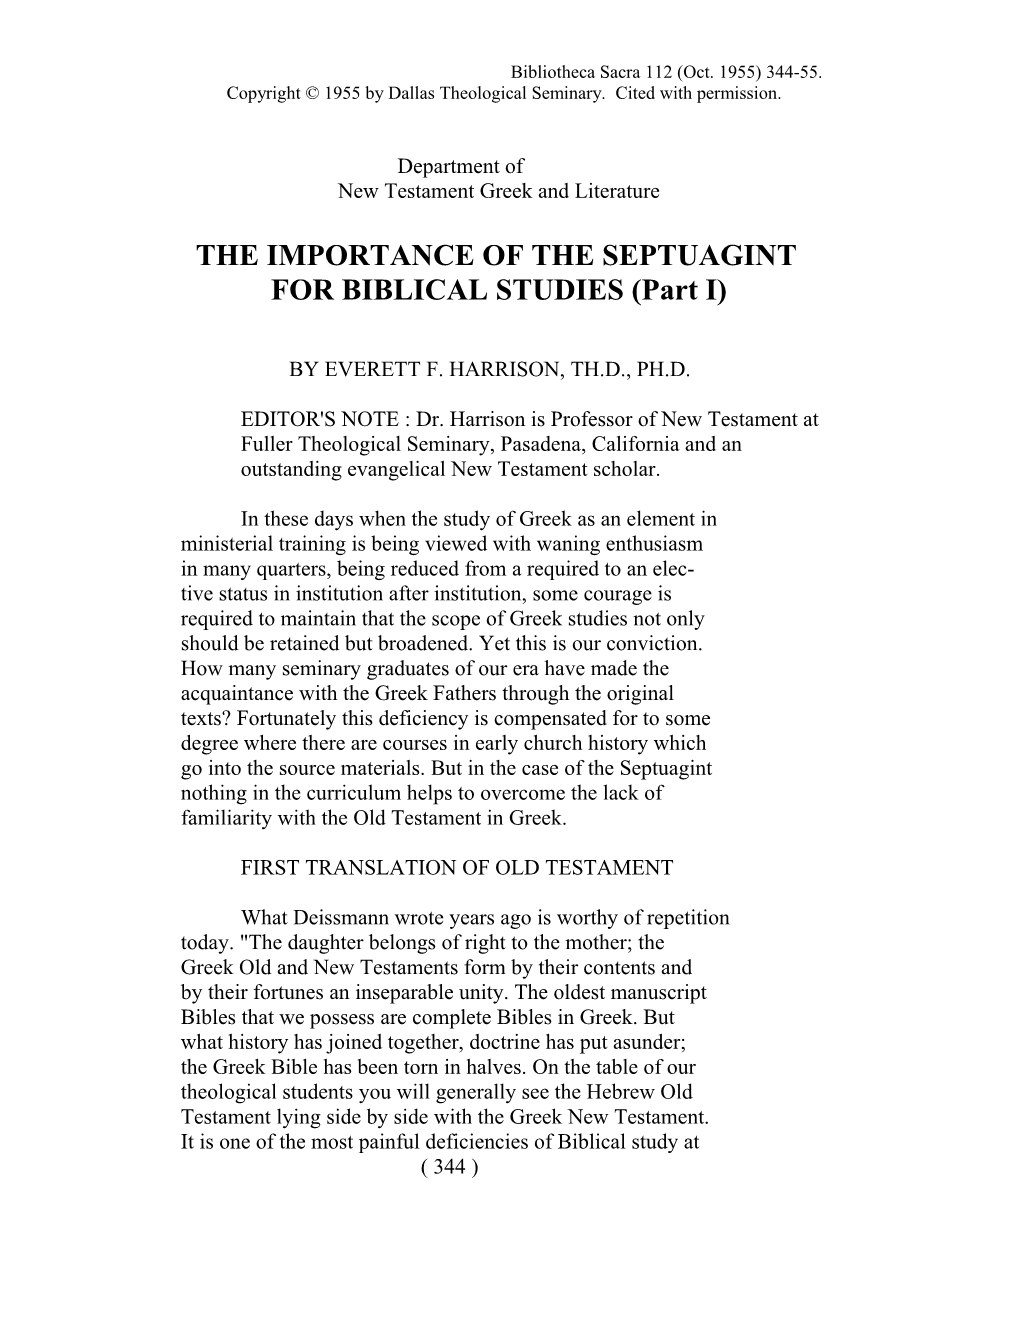 The Importance of the Septuagint for Biblical Studies (Pt. I)